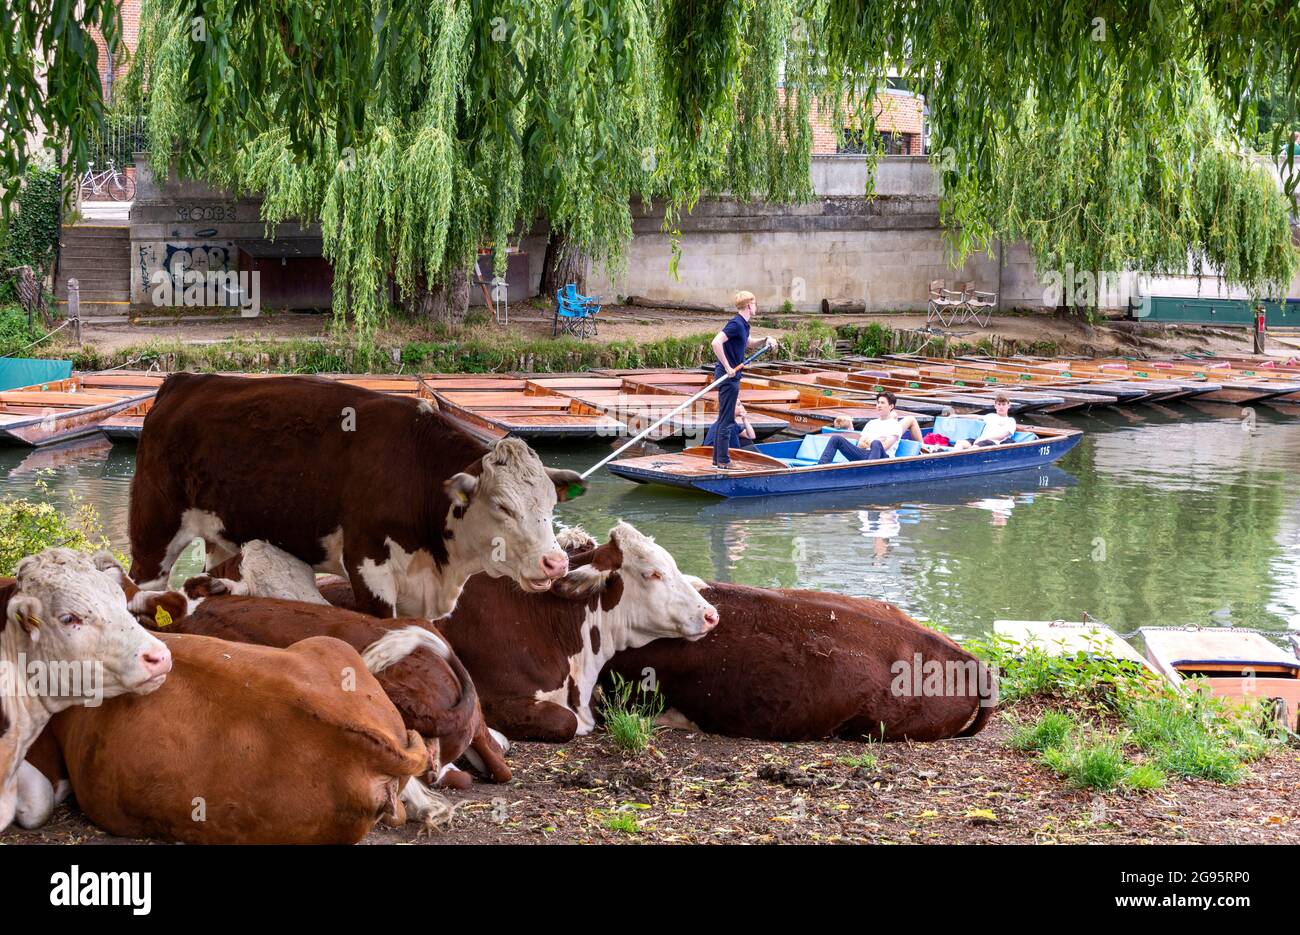 CAMBRIDGE ENGLAND PUNT AND PASSENGERS ON THE RIVER CAM AND A SMALL HERD OF HEREFORD CATTLE ON THE BANK Stock Photo